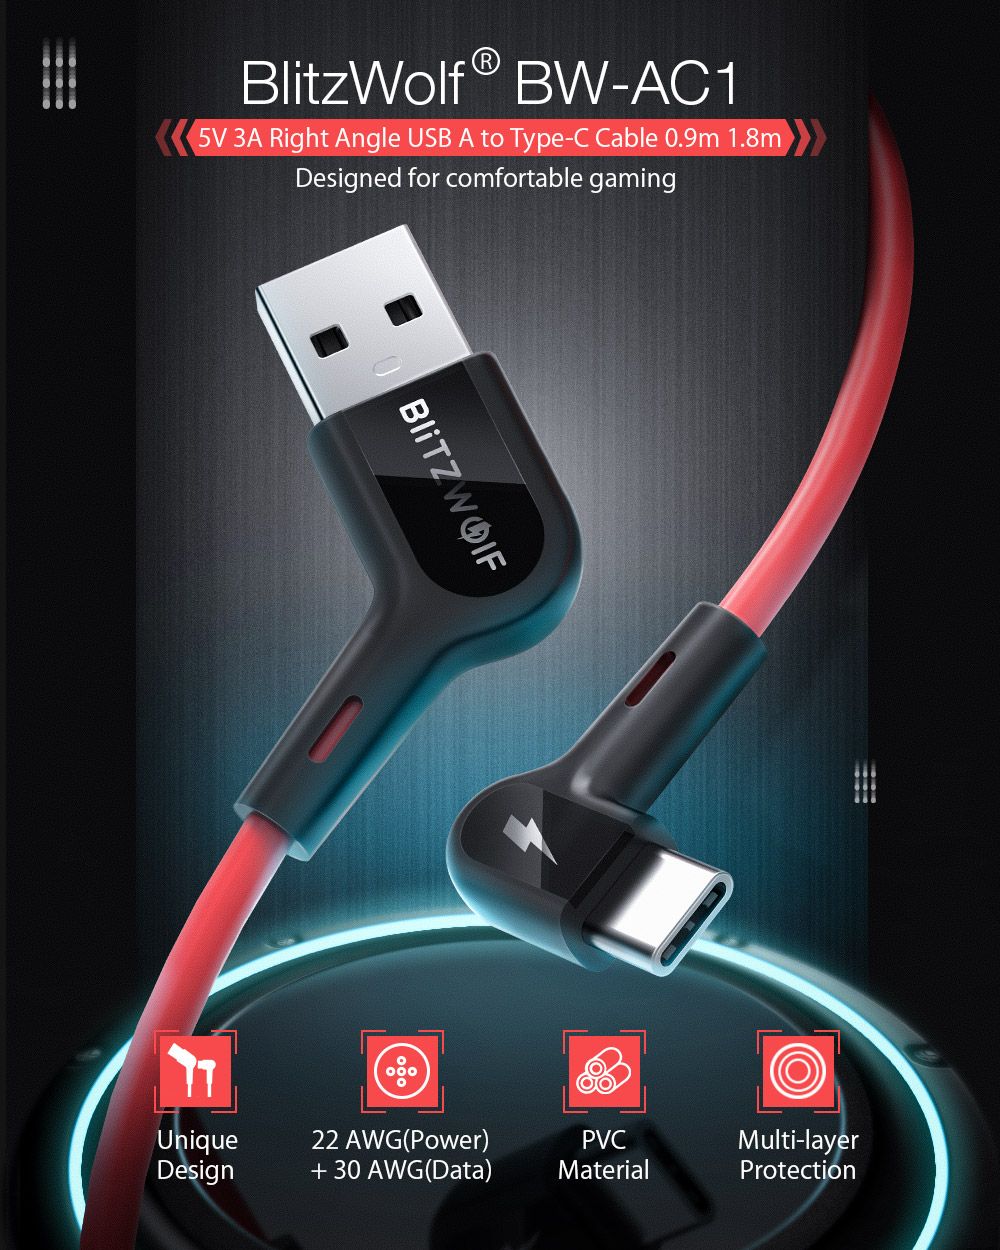 Blitzwolfreg-BW-AC1-3A-90degRight-Angle-USB-A-to-Type-C-Data-Cable-09m-18m-Reddot-Award-2020-for-Gam-1533162